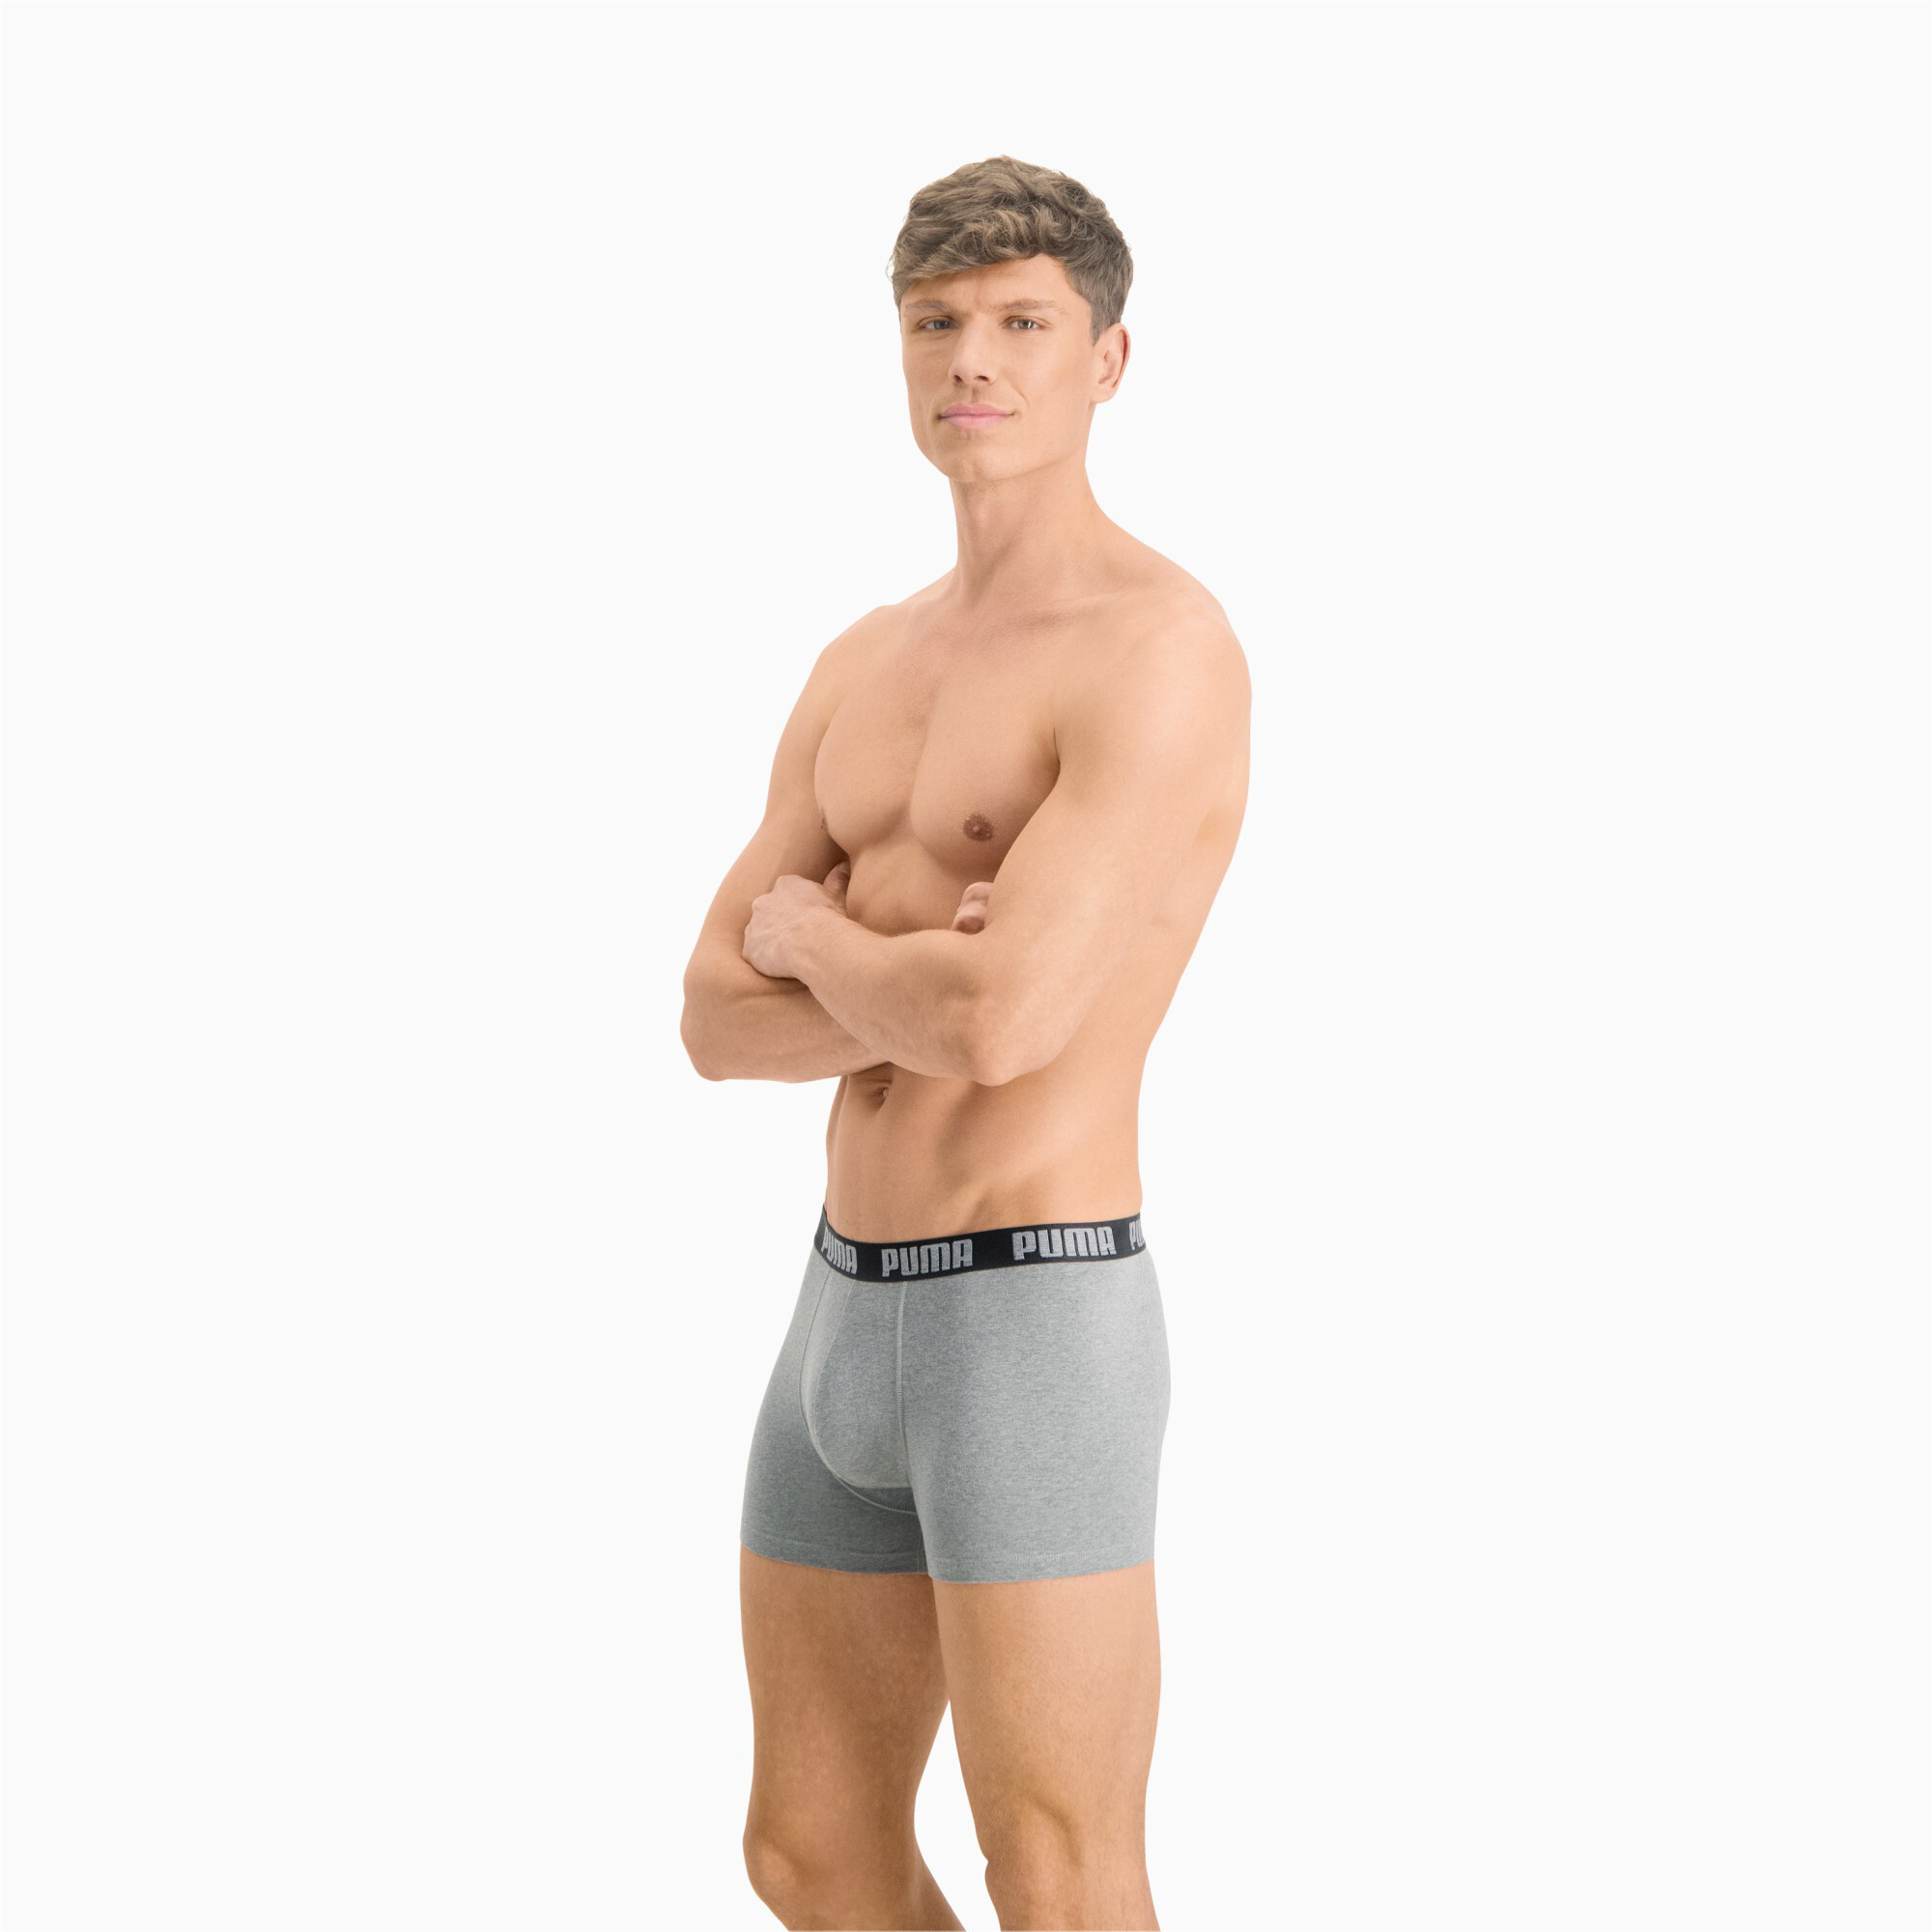 Men's Puma's Everyday Boxers 3 Pack, Size 5, Clothing